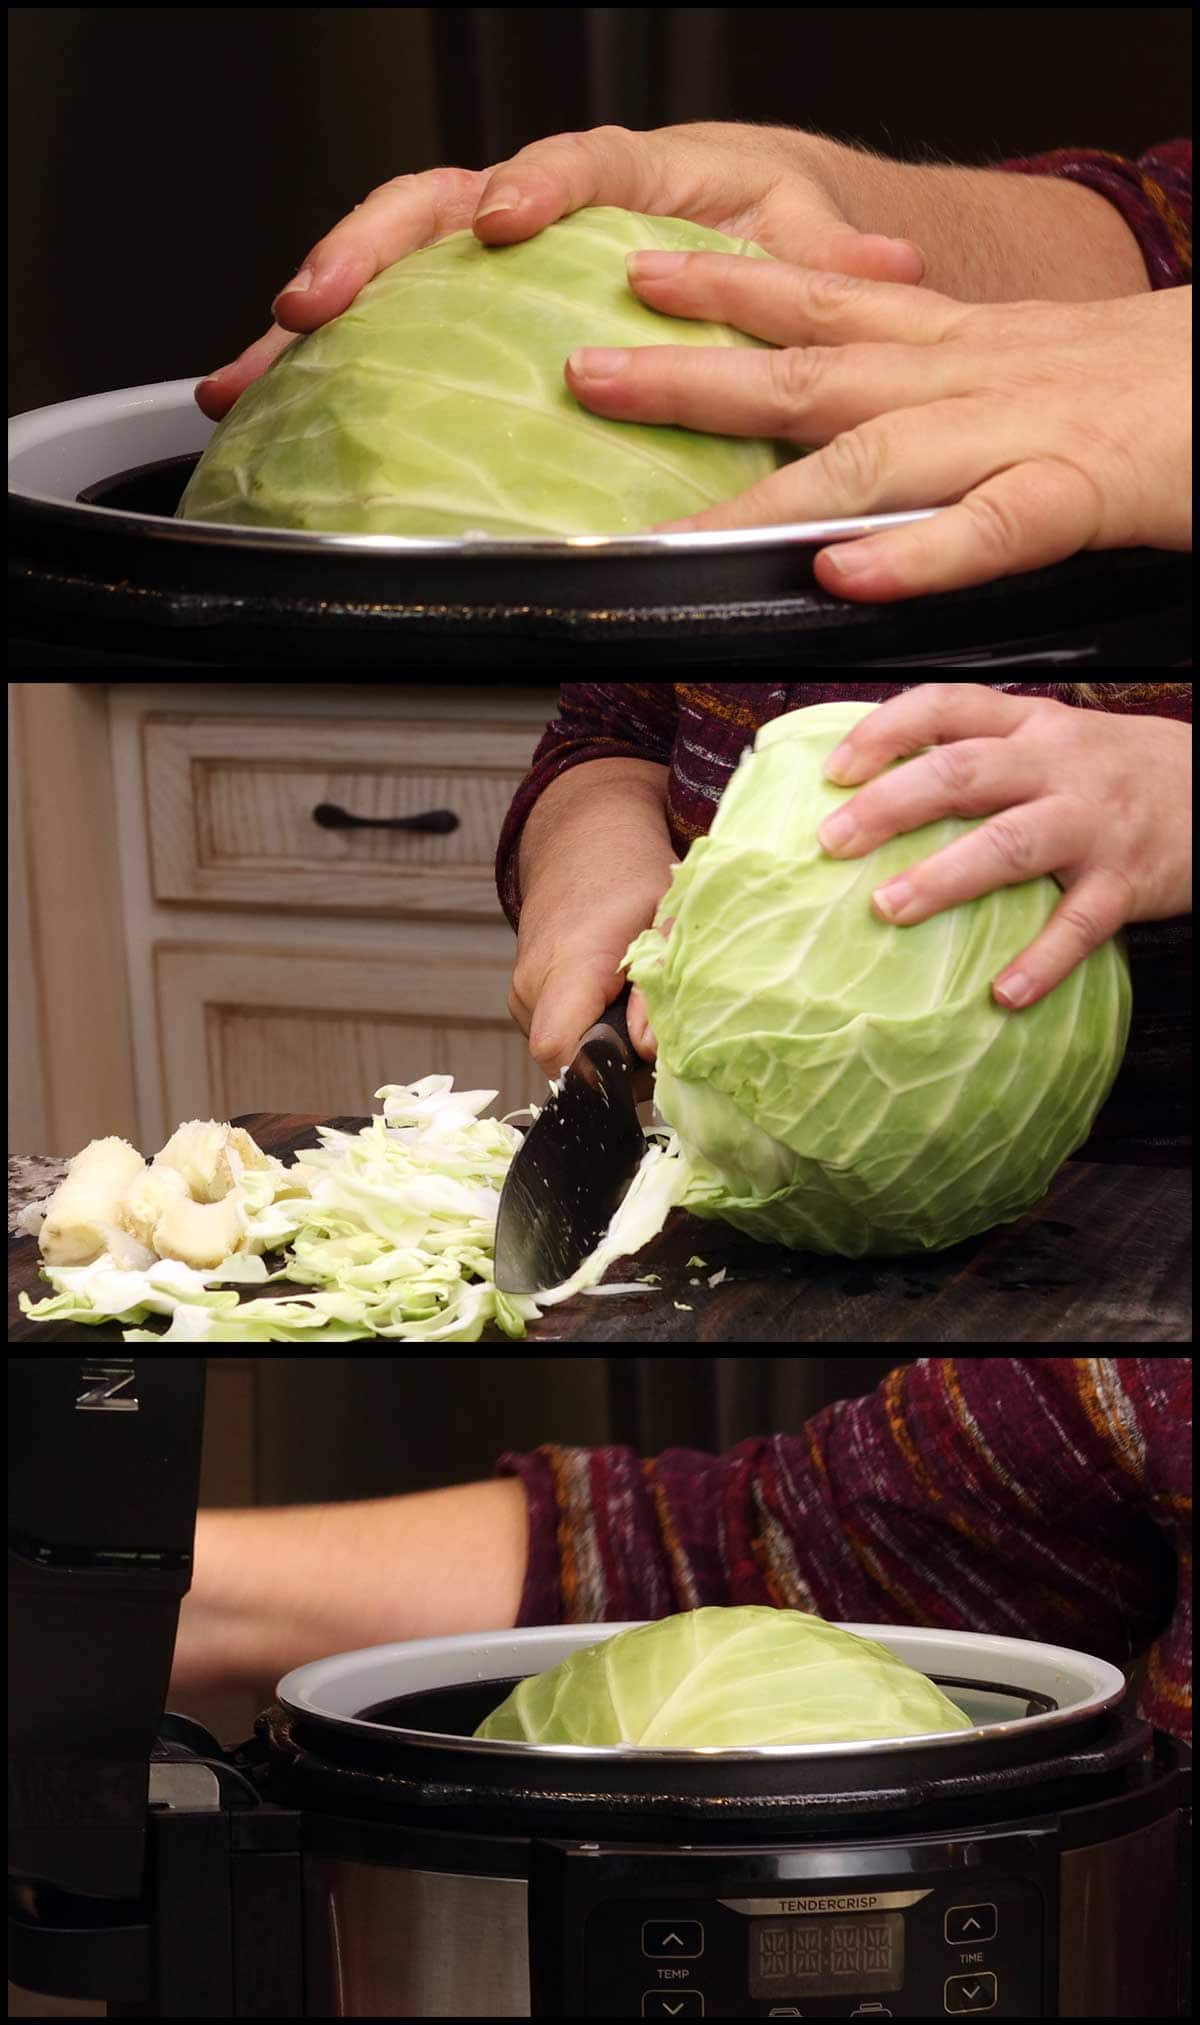 Trimming the cabbage to fit in the NInja Foodi